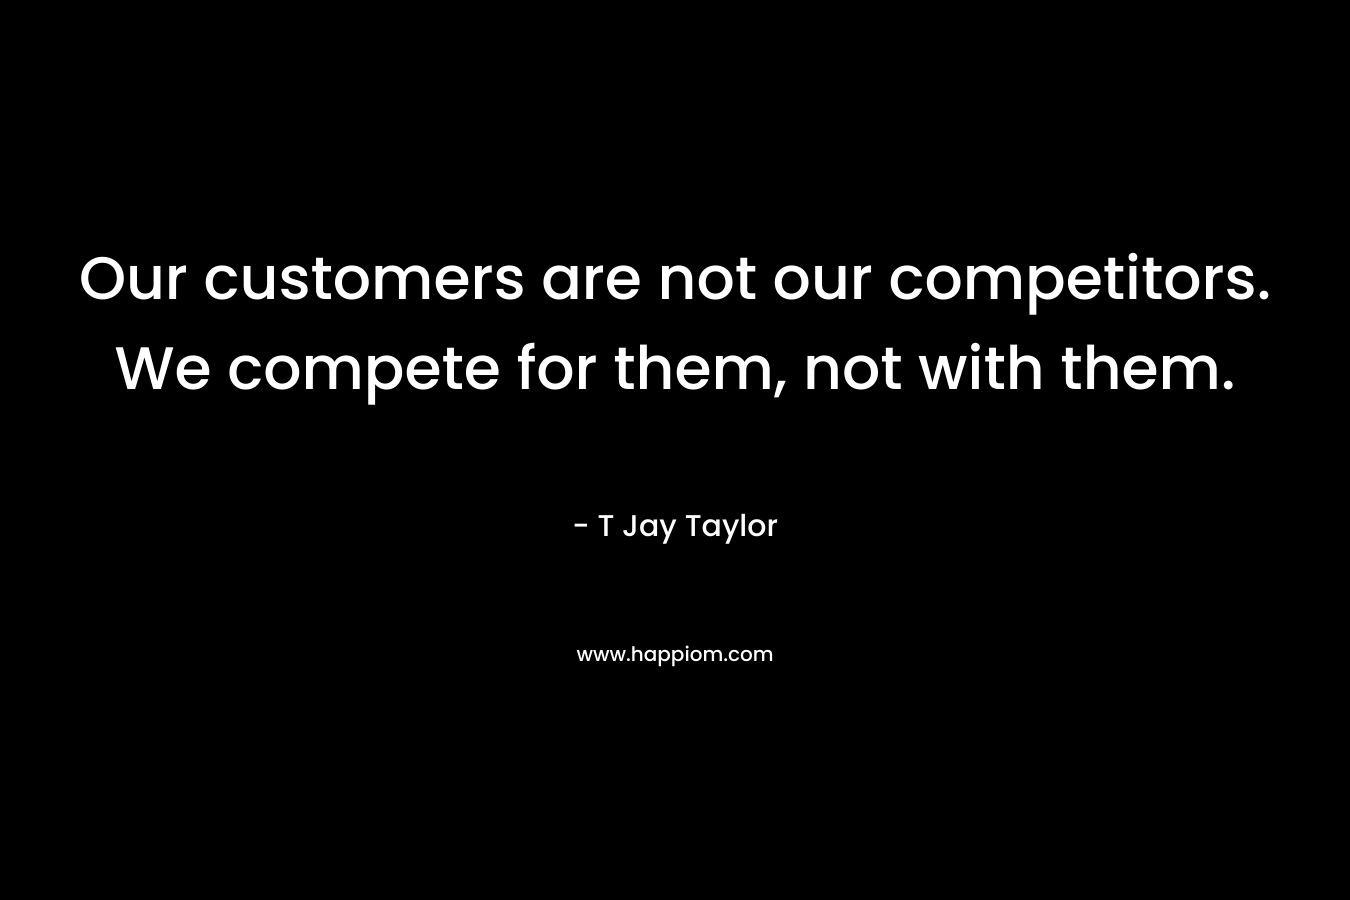 Our customers are not our competitors. We compete for them, not with them. – T Jay Taylor